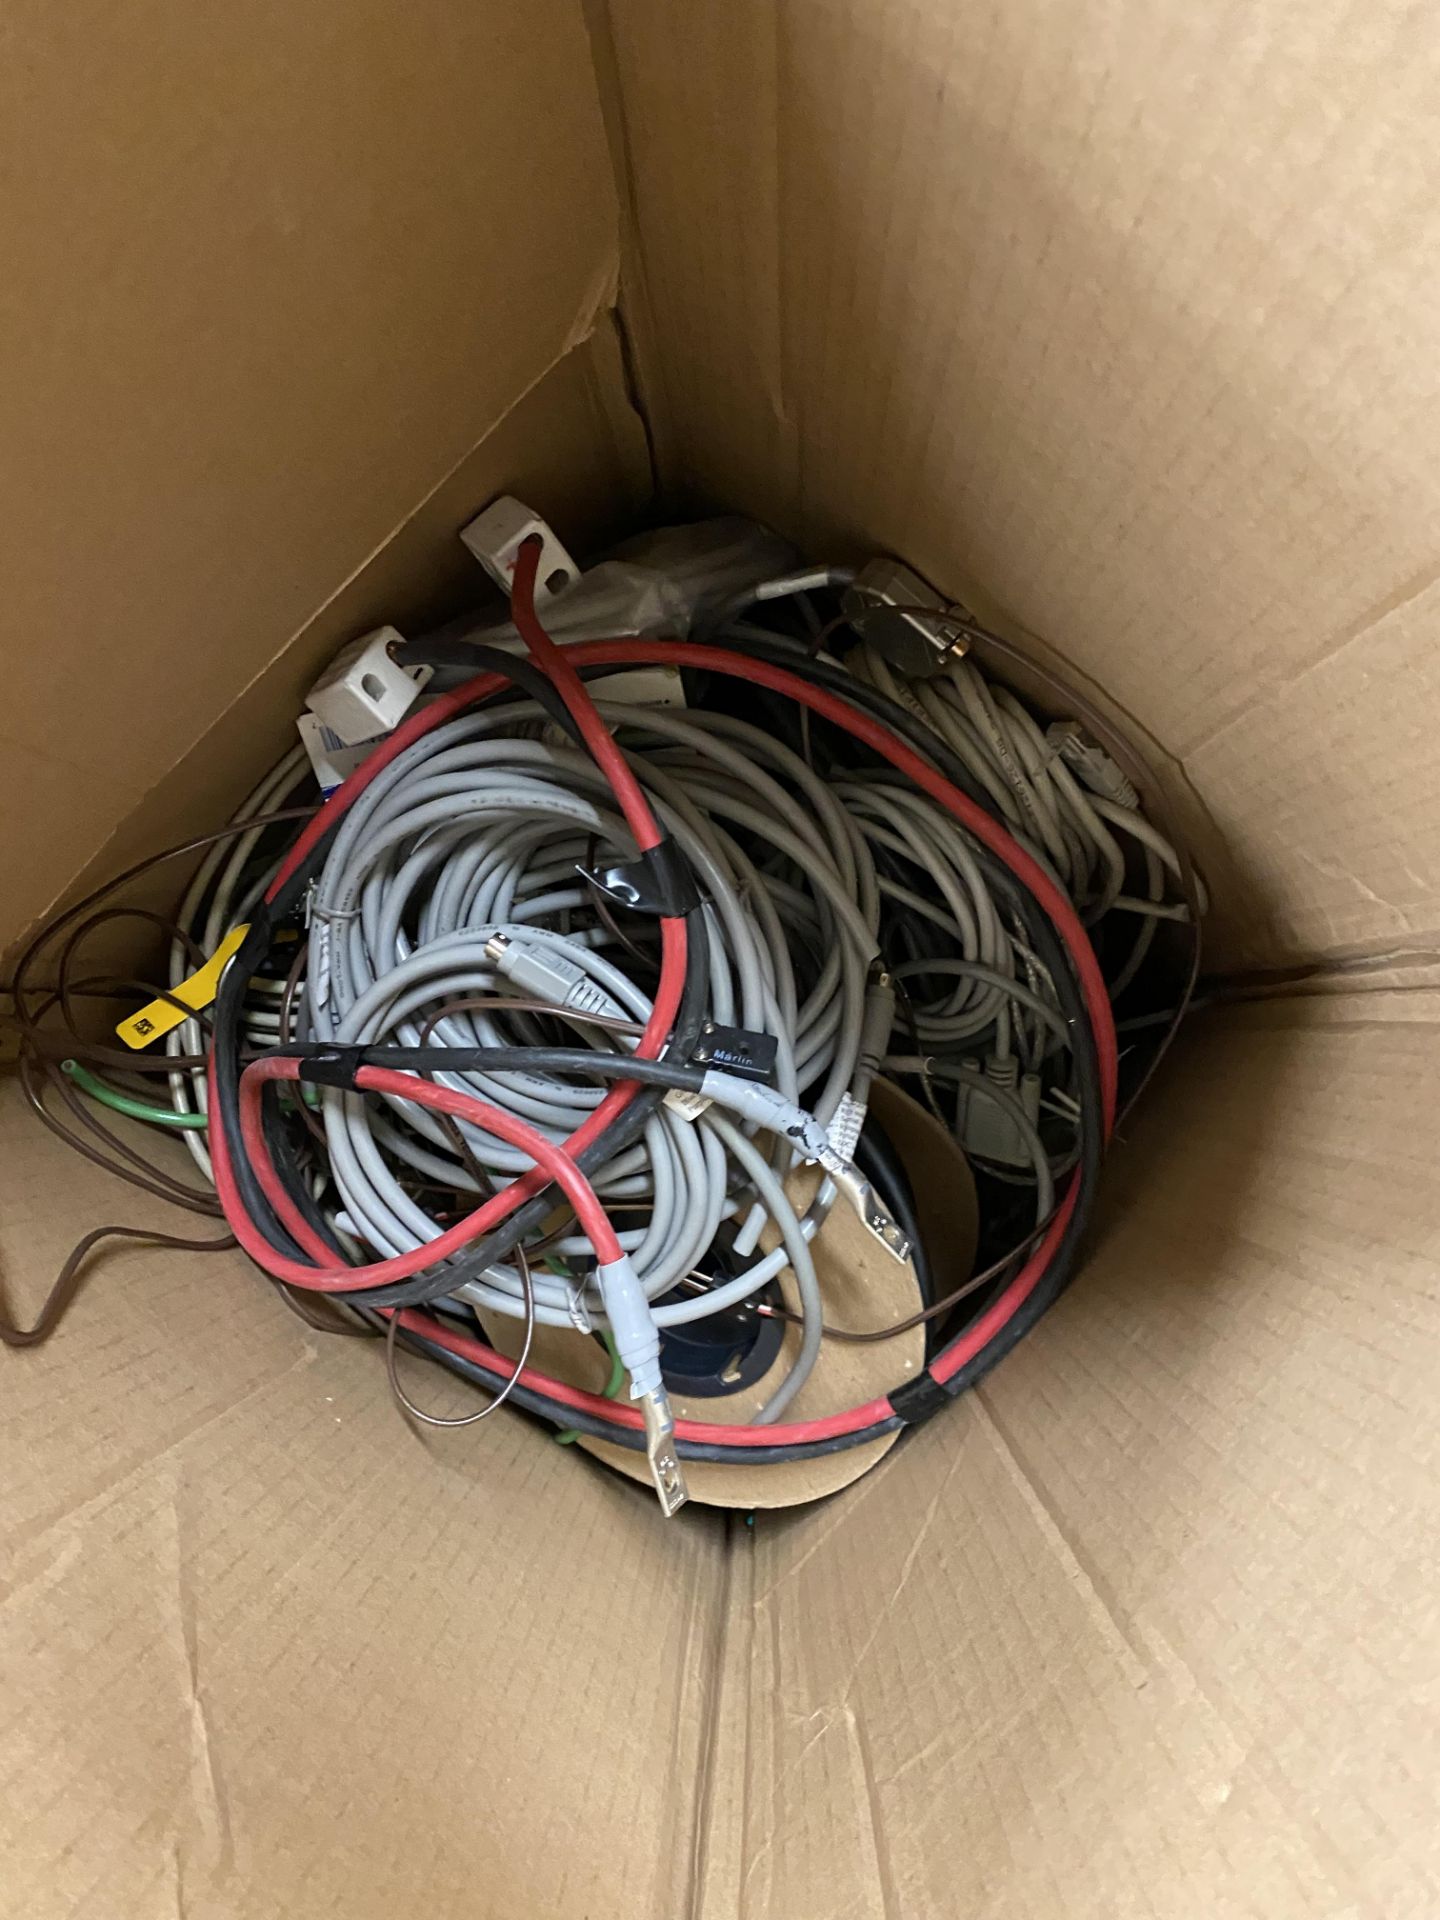 {LOT} Asst. Cable in Box - See Pics (Inspection Encouraged)